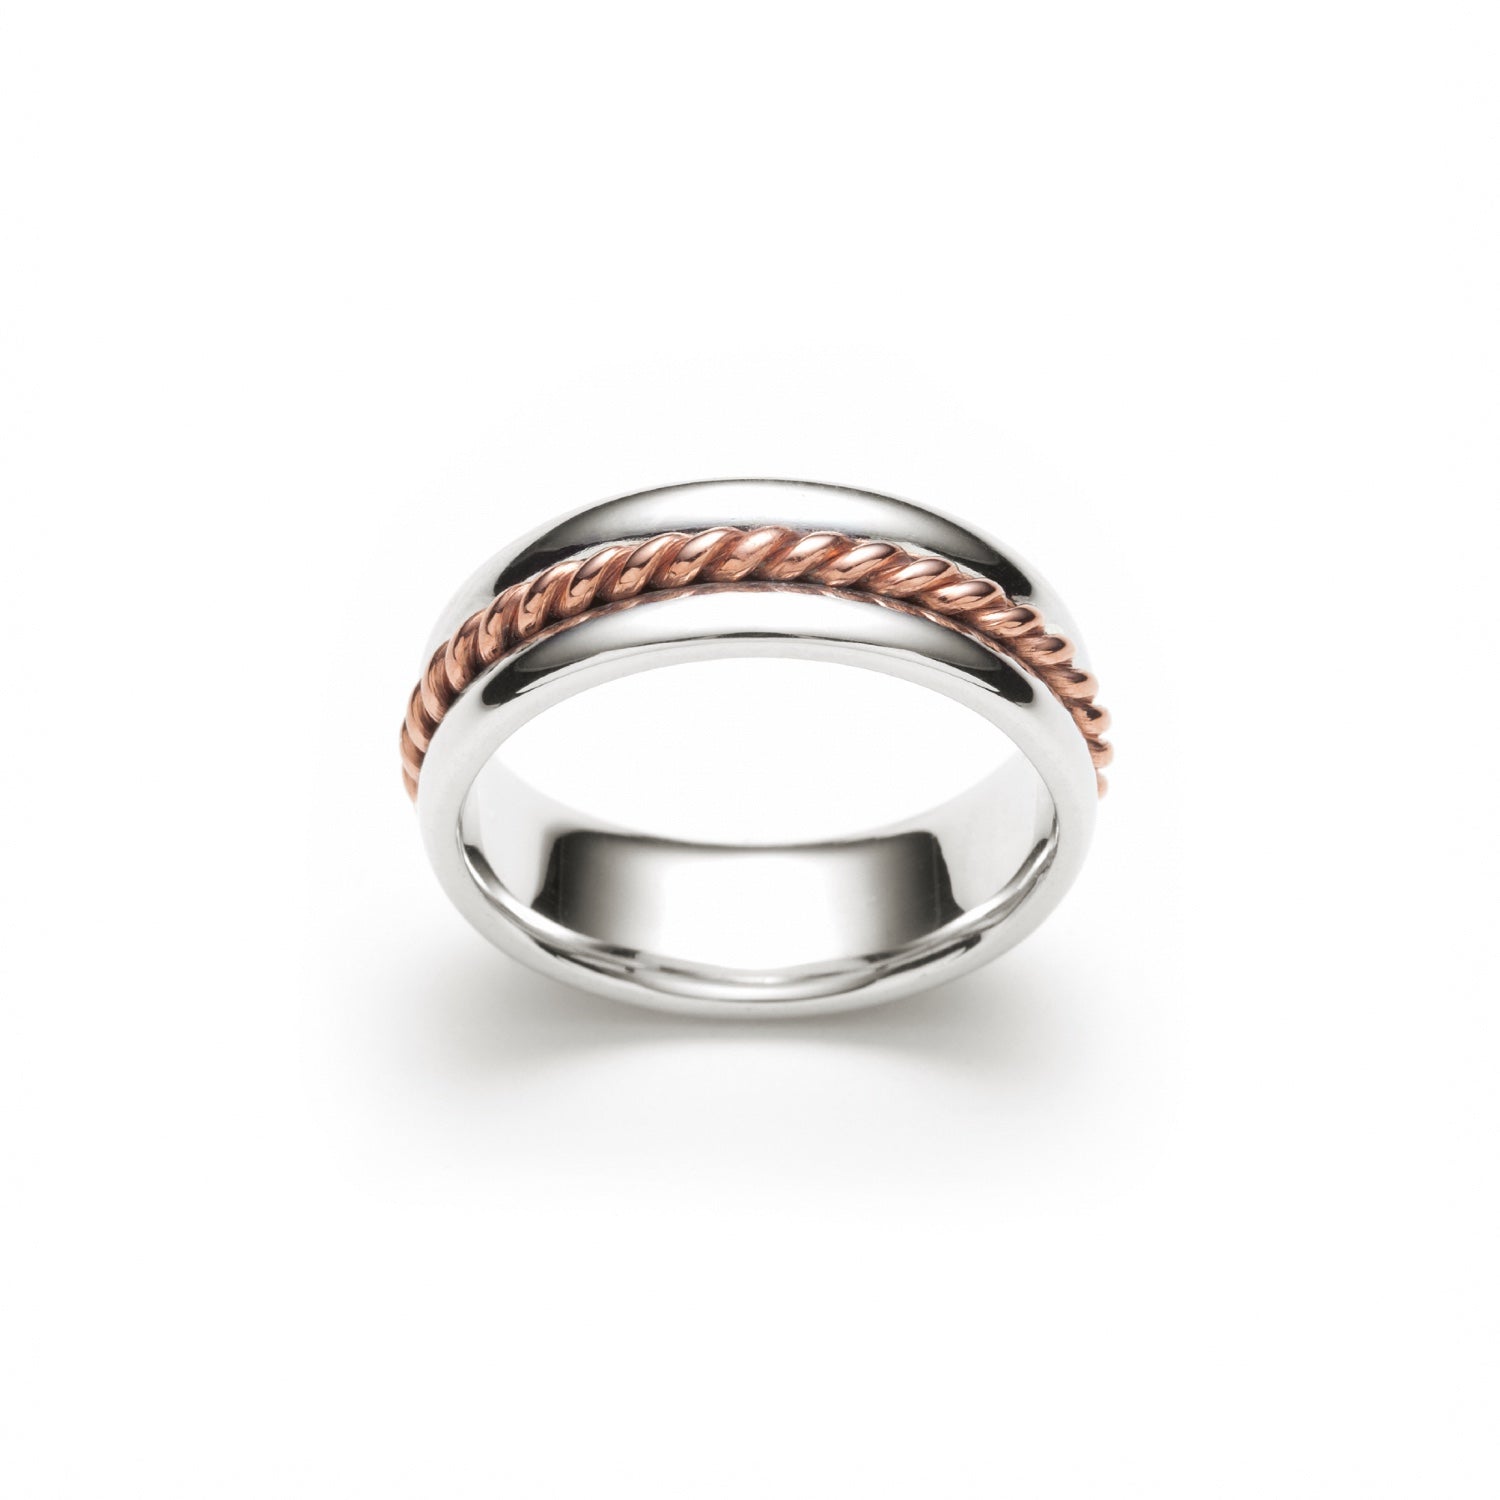 Wide Twist Polished Finish 8-9 mm Mixed Metal Wedding Band in Rose and White Gold